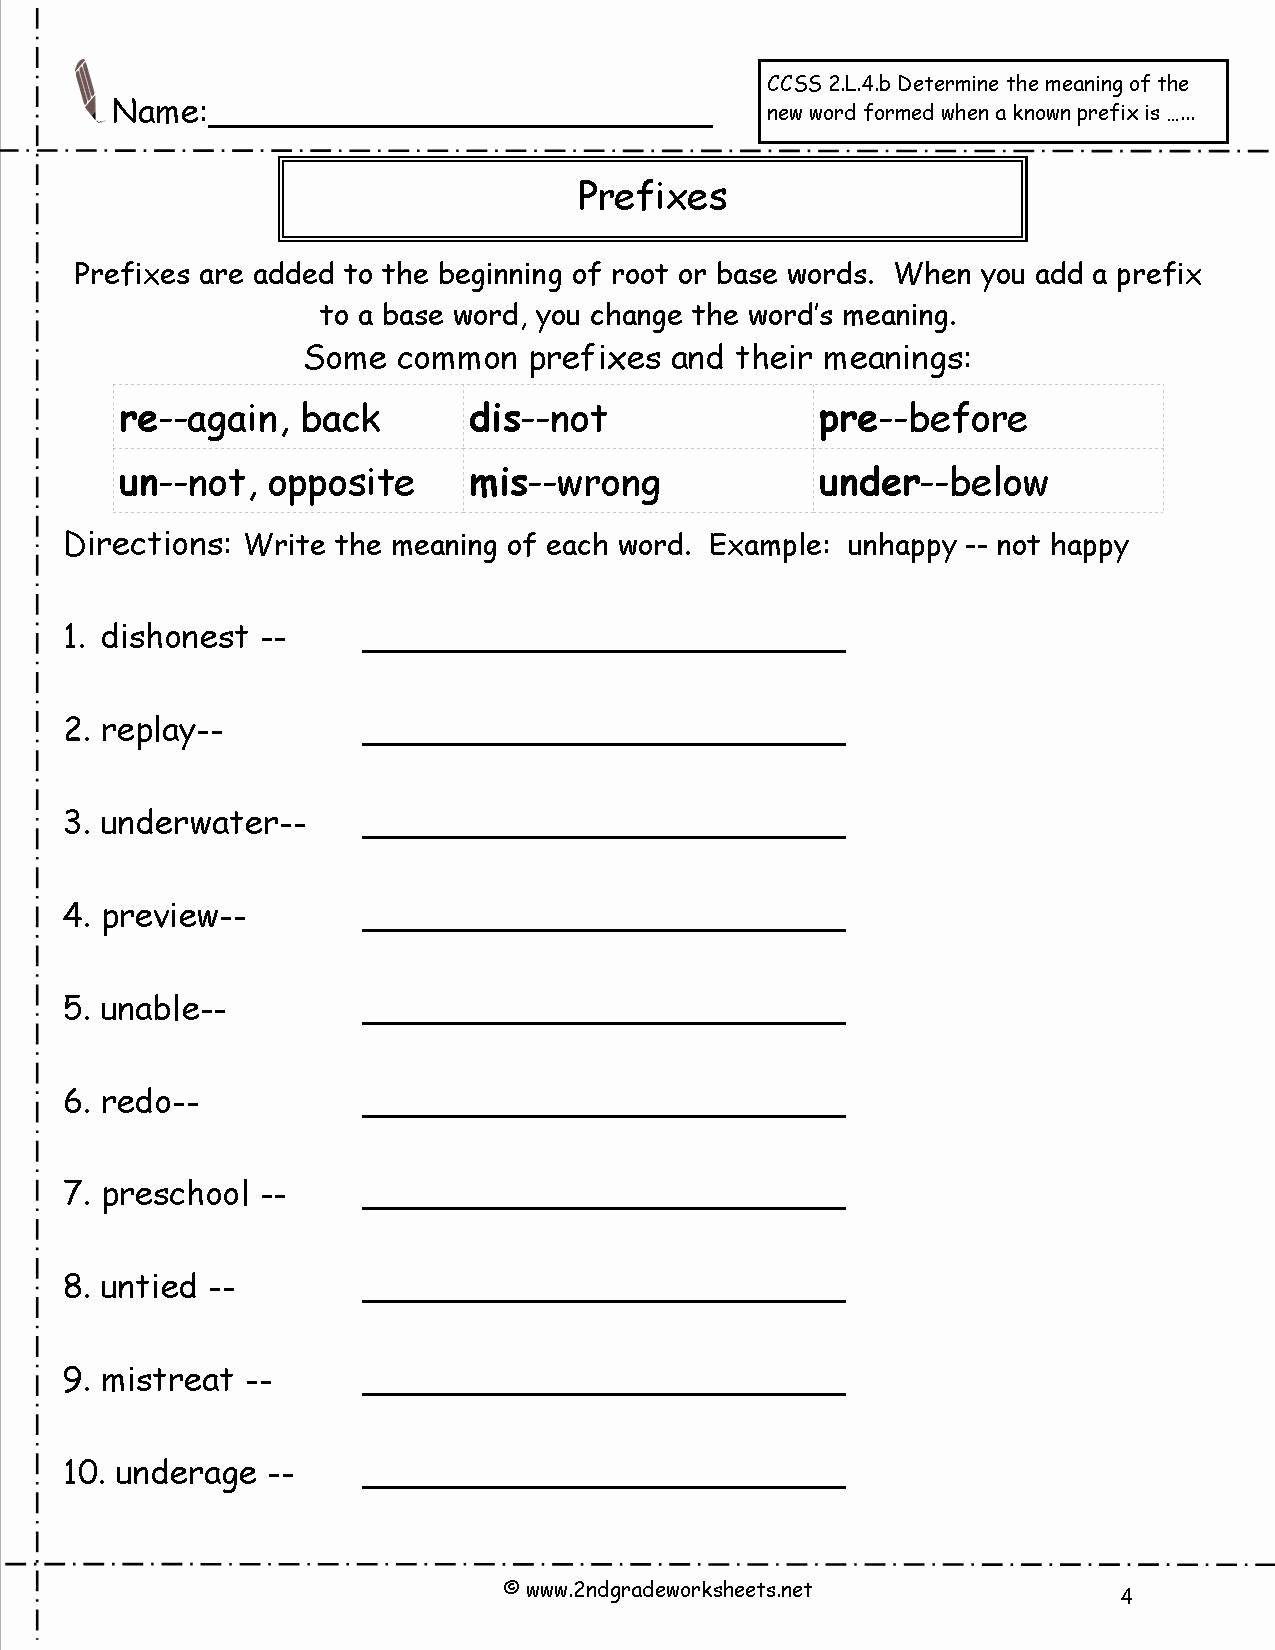 Suffix Worksheets for 4th Grade New 20 Suffix Worksheets for 4th Grade